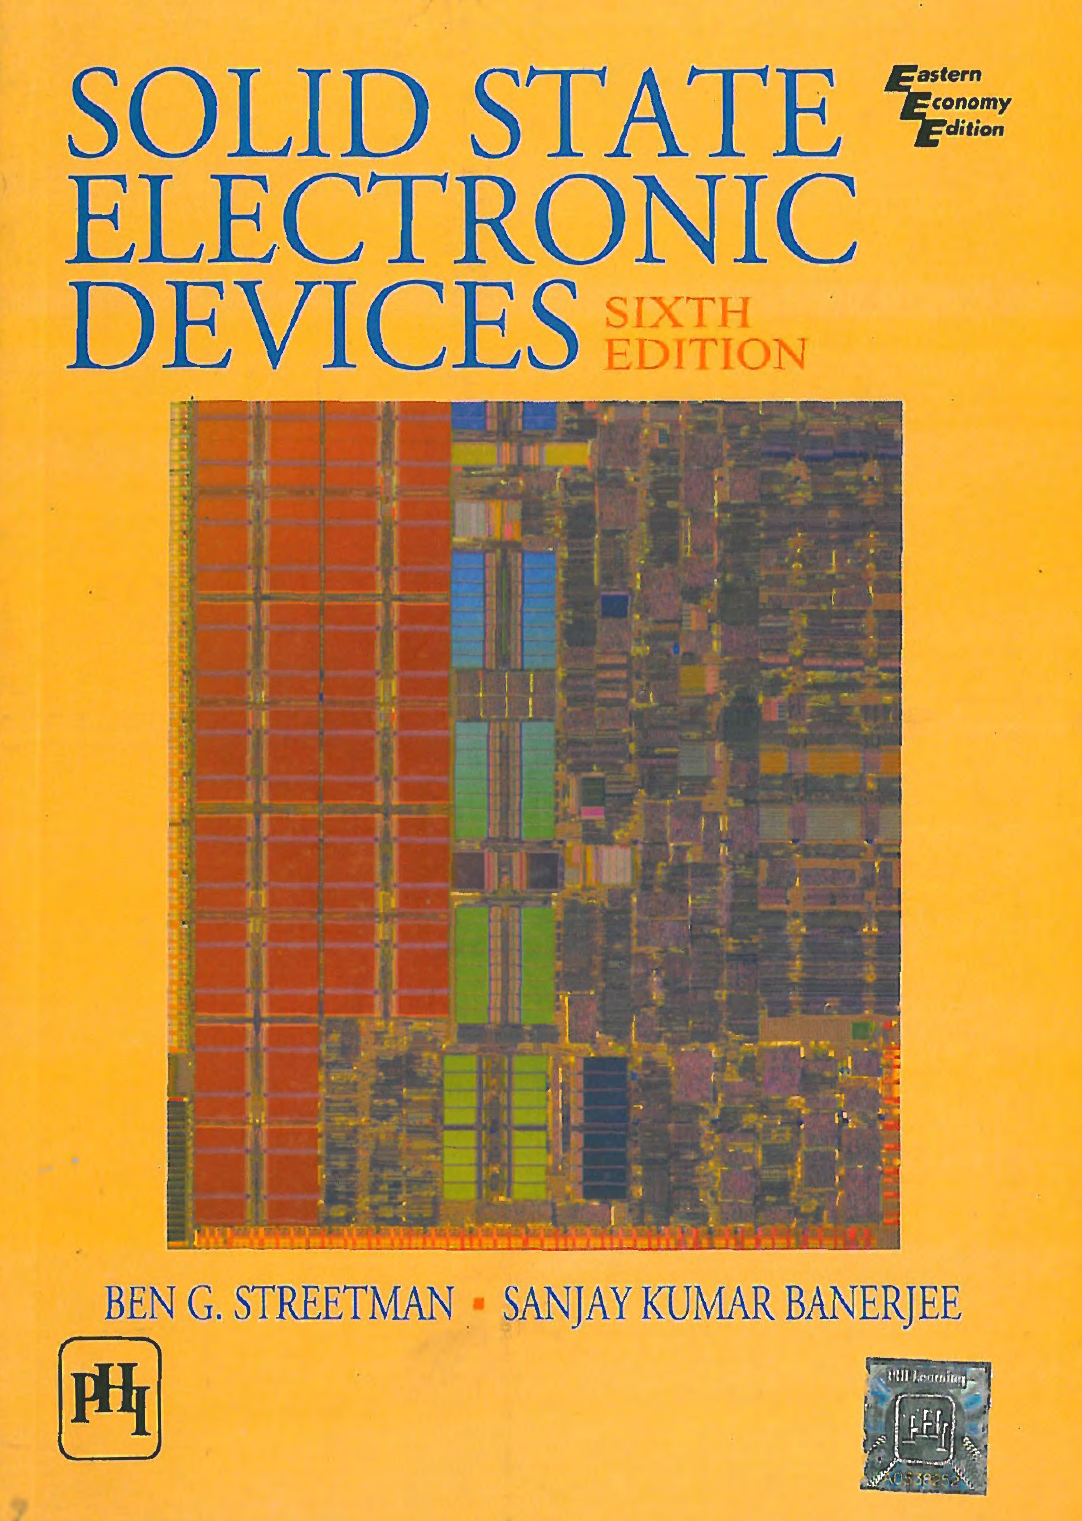 solid state electronic devices 6th edition pdf download